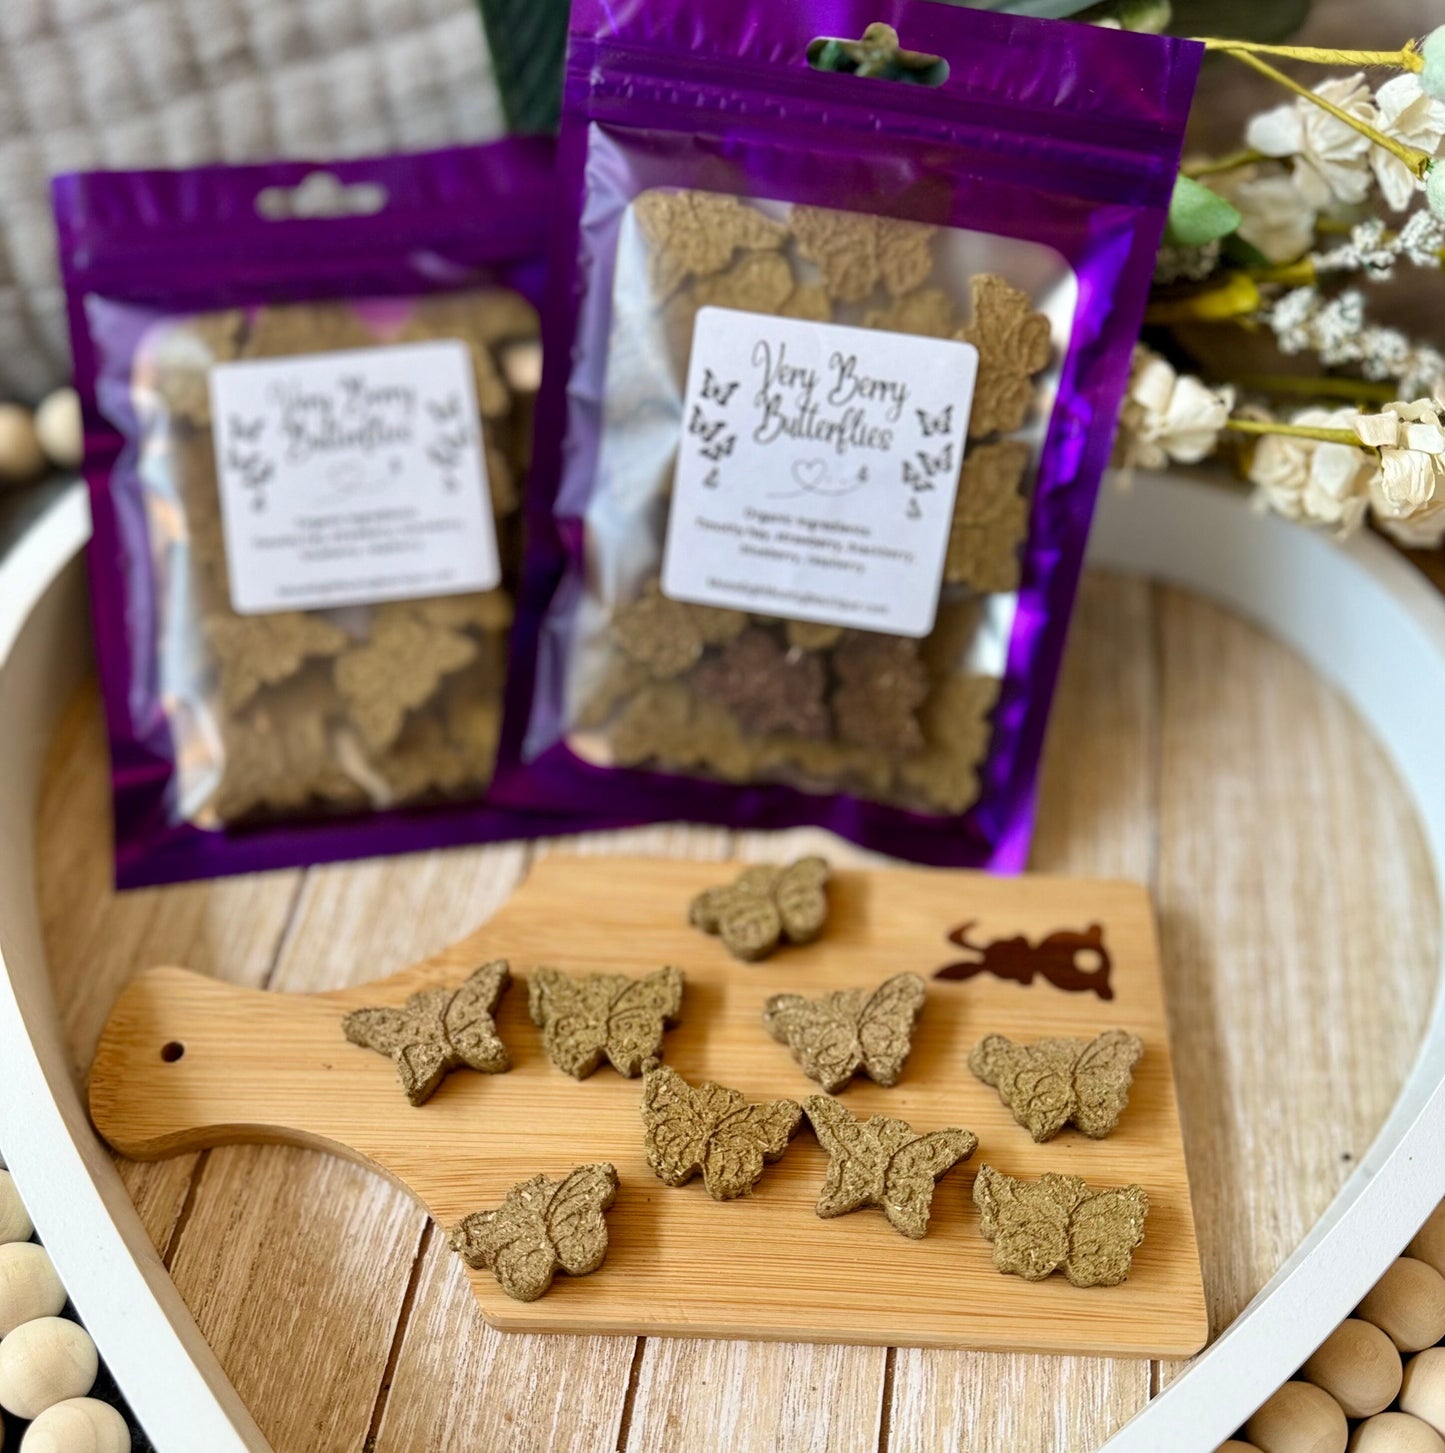 Very Berry Butterflies | Spring Inspired OAT FREE Timothy Hay Based Treats, Healthy, Organic, Crunchy Snacks for Rabbits, & Small Pets